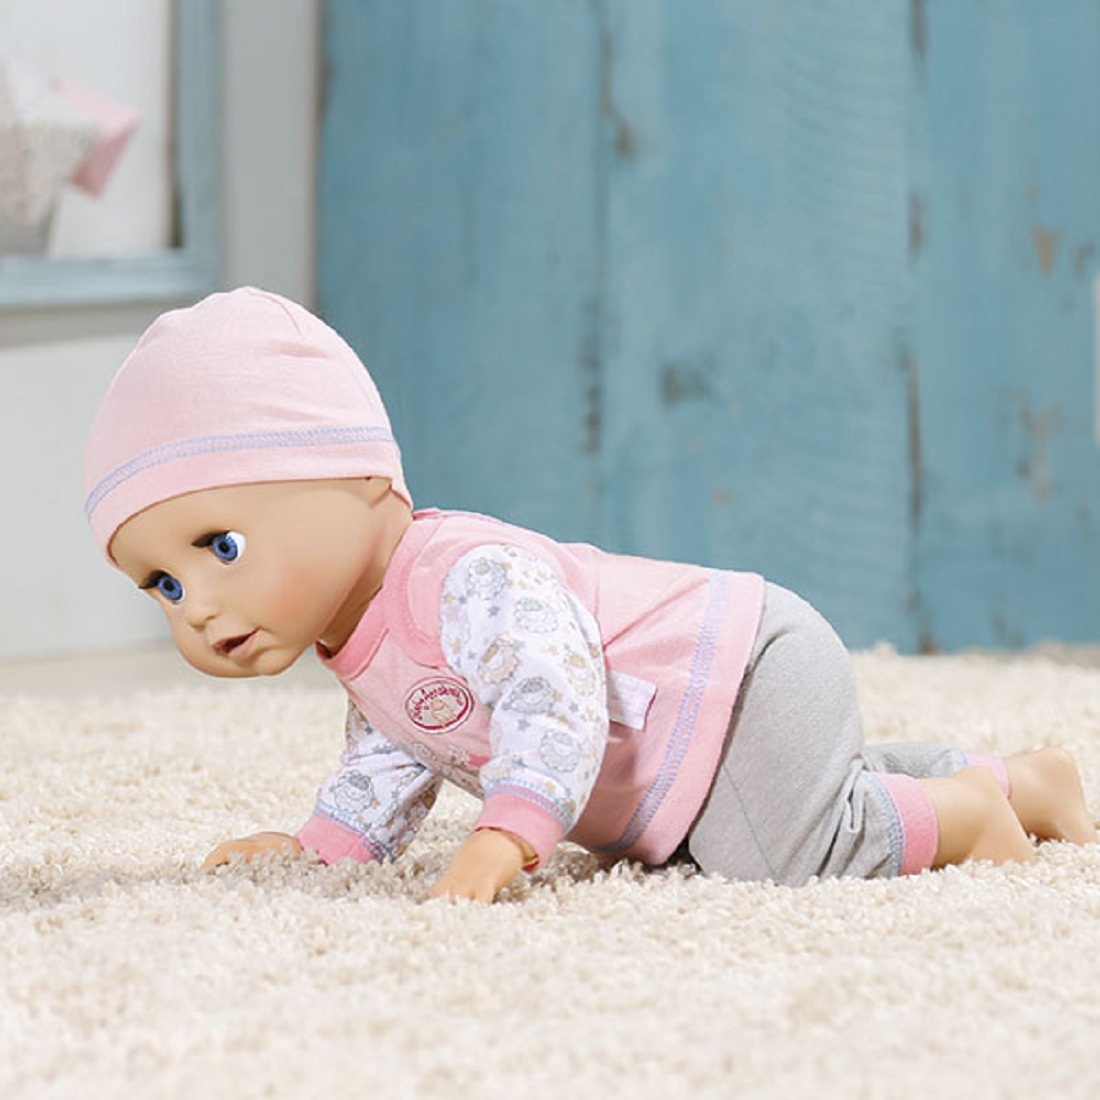 baby annabell walk and crawl